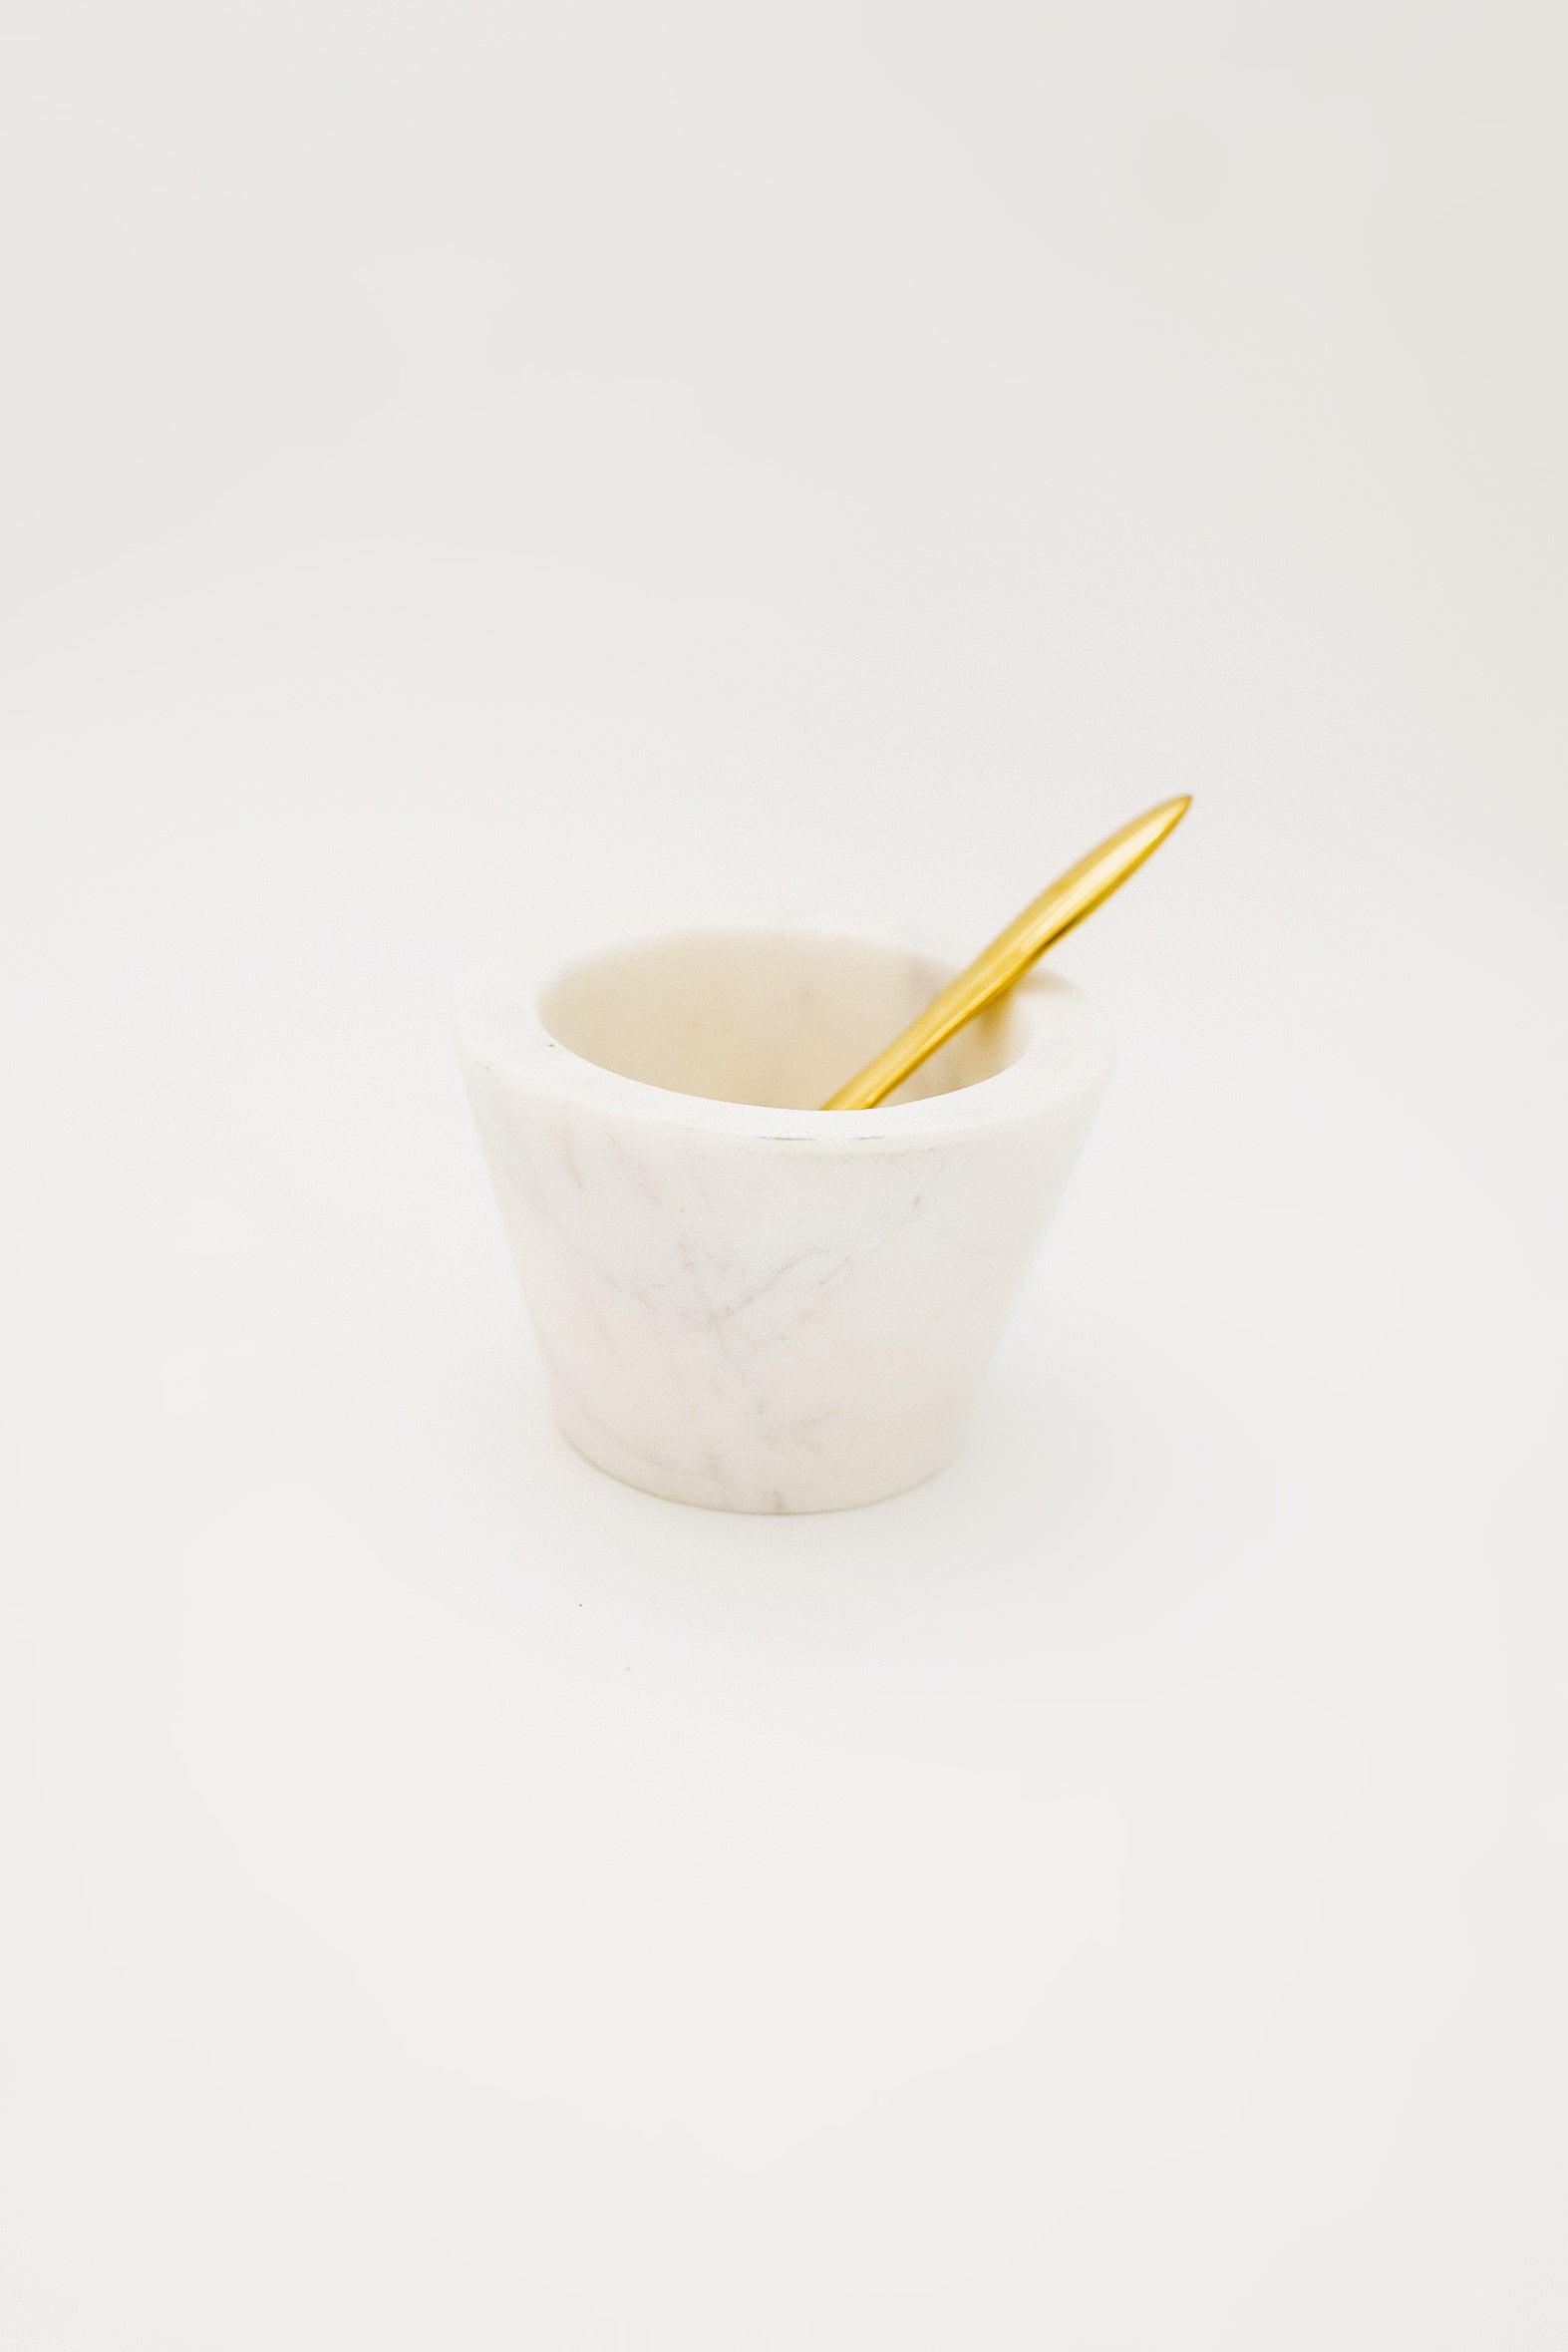 Felicity Marble Bowl w Brass Spoon - 3 Colors